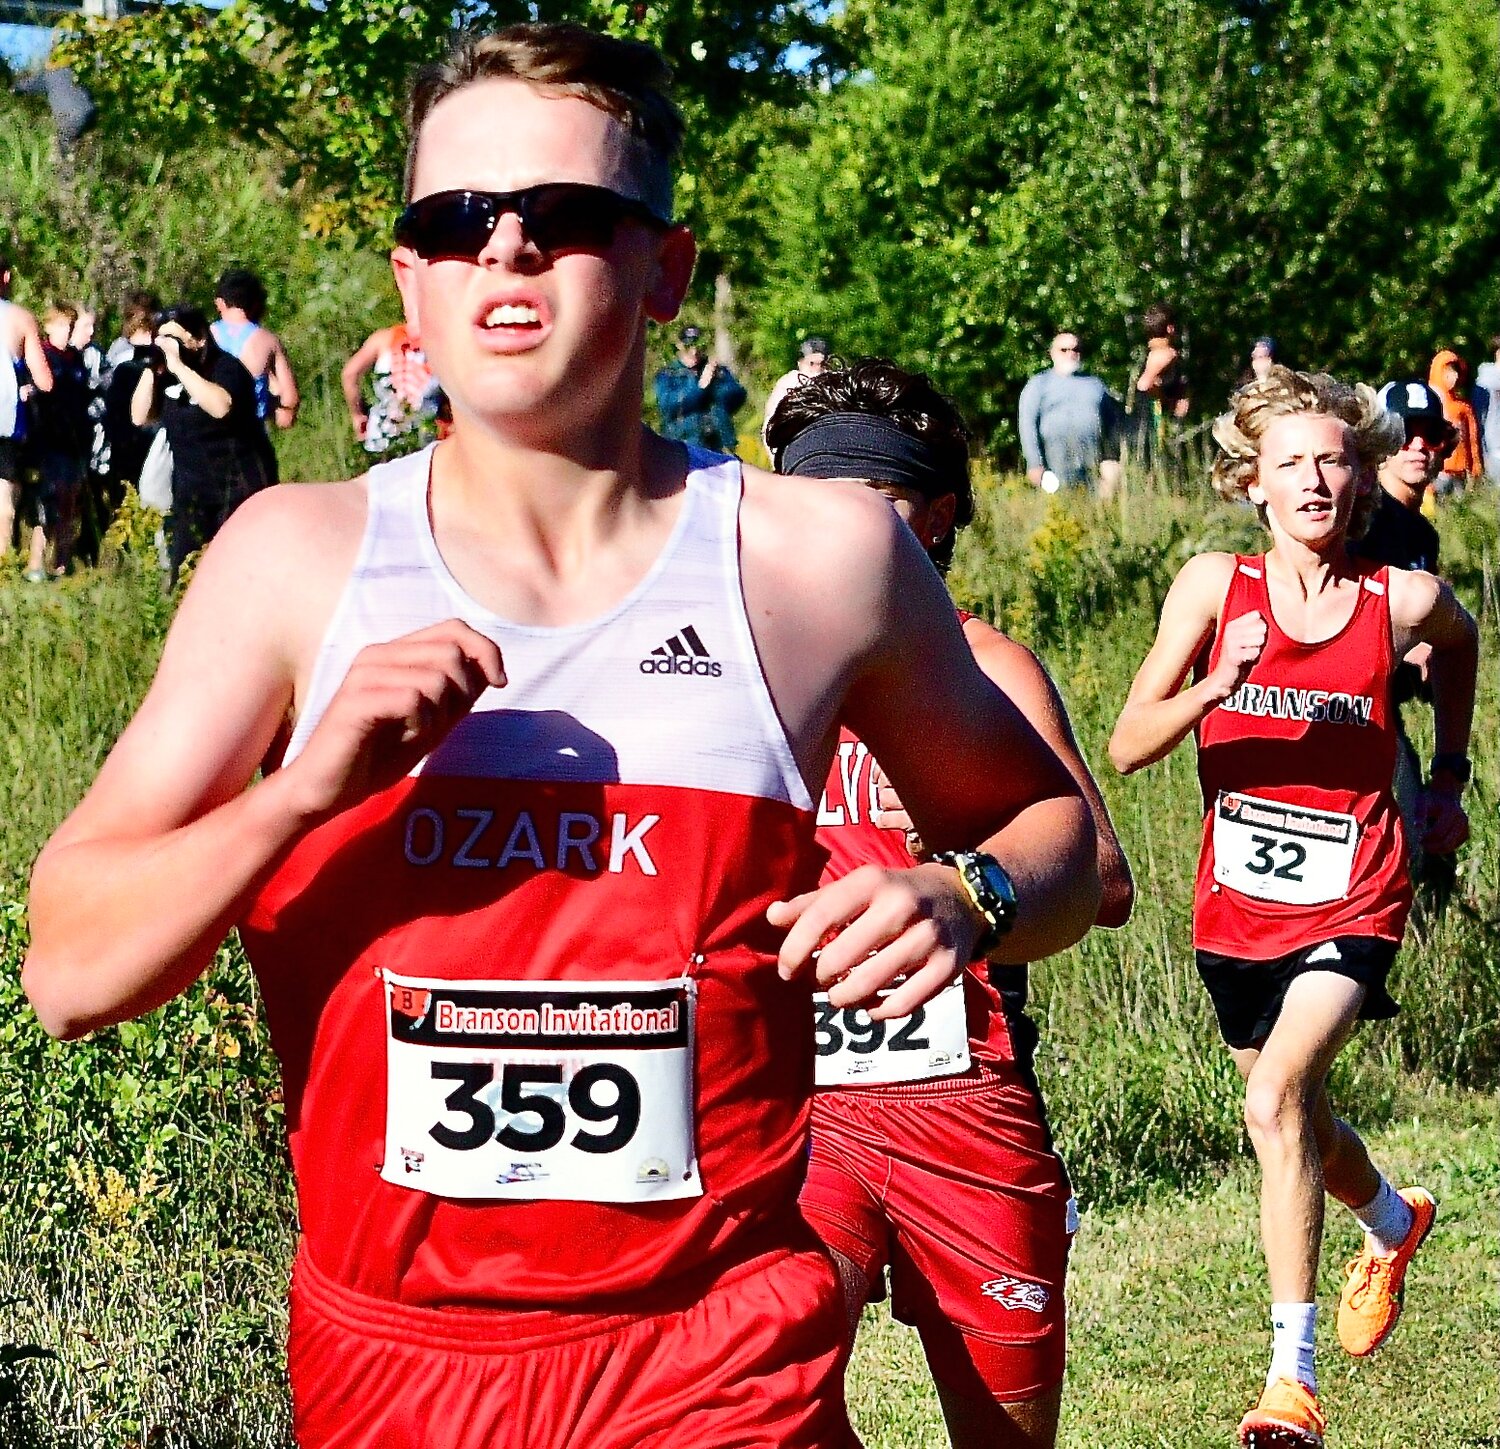 OZARK'S TRUMAN GRIESSEL sports sunglasses while running.